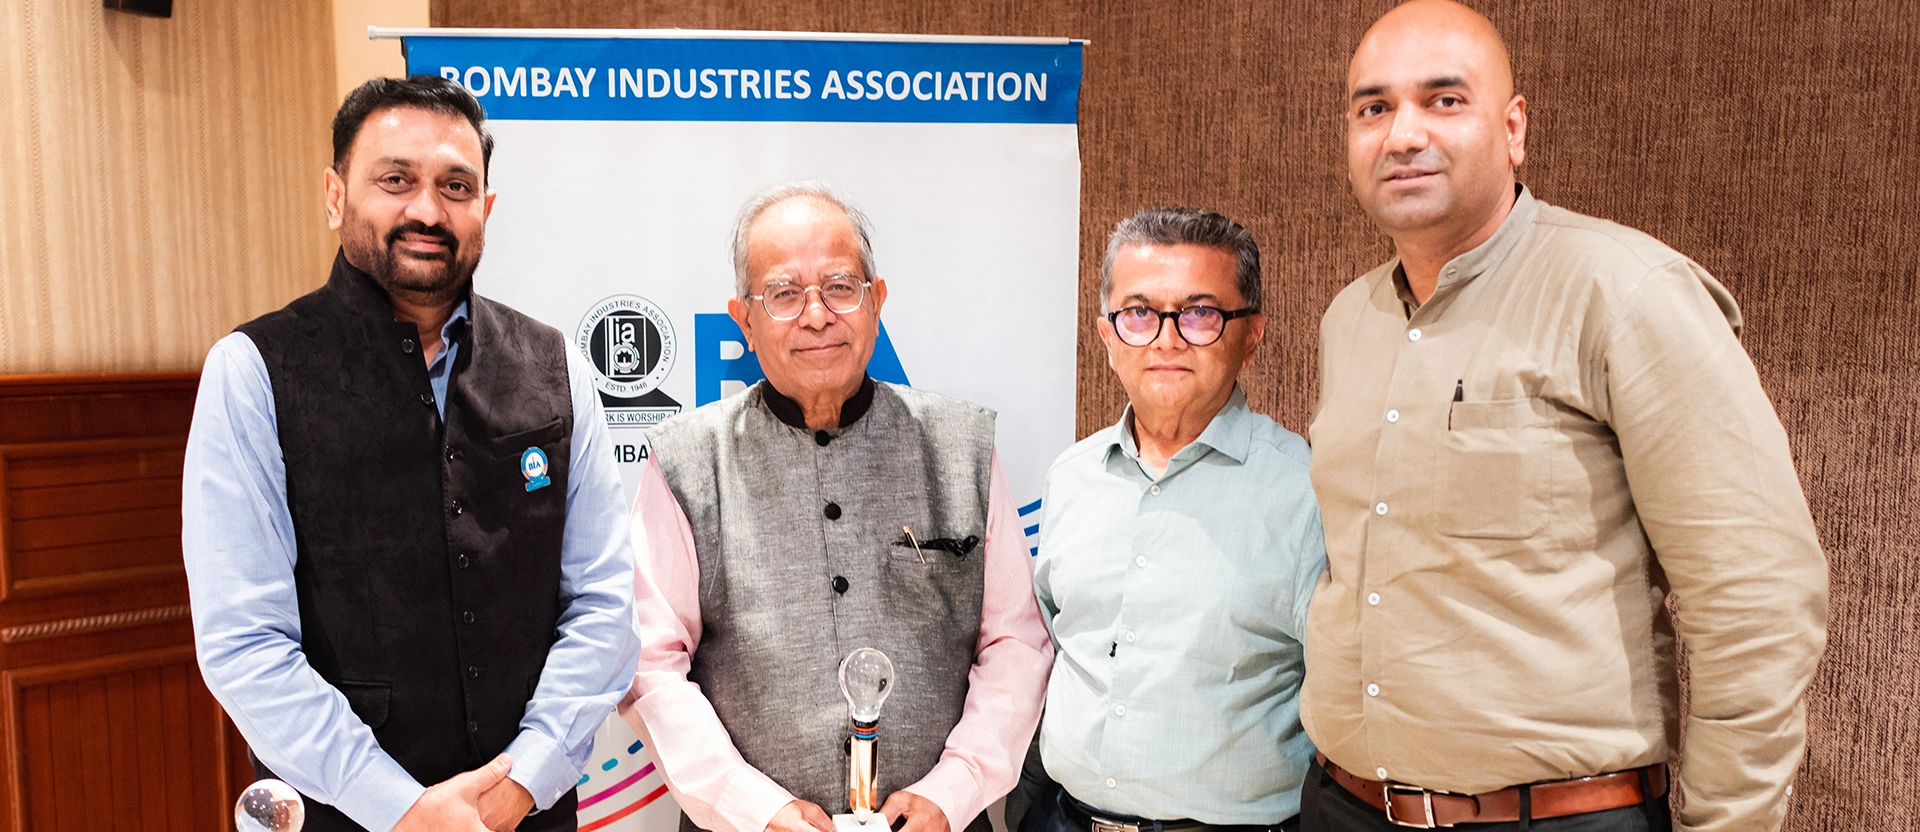 Mr. Nevil Sanghvi at the export opportunities and labour law along with other Bombay Industries Association BIA members